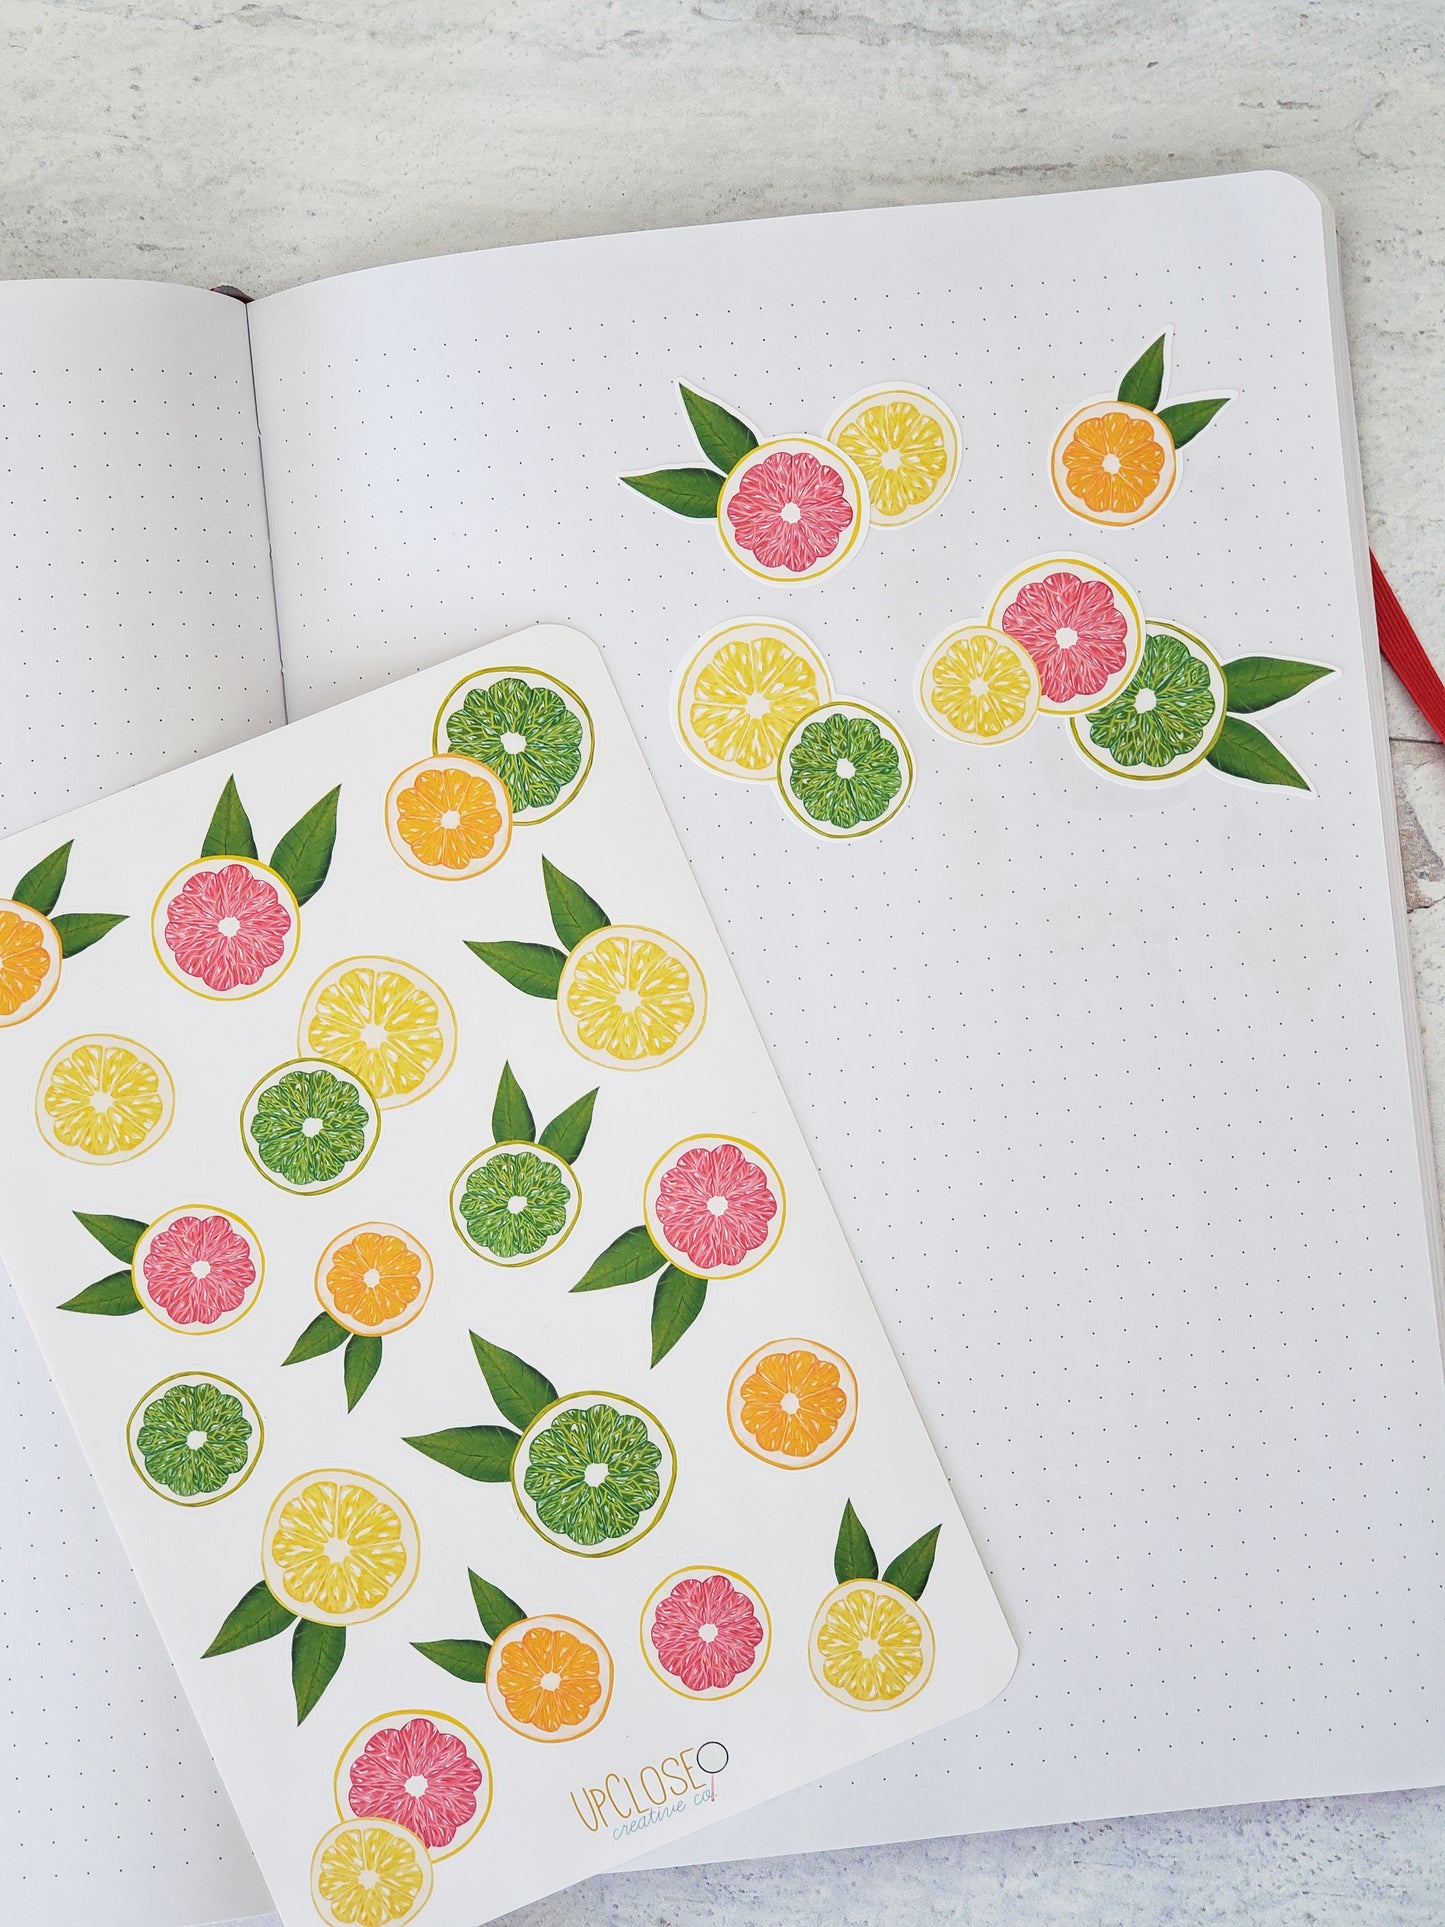 Stickers from the citrus fruits sticker sheet have been arranged on a dot grid journal page.